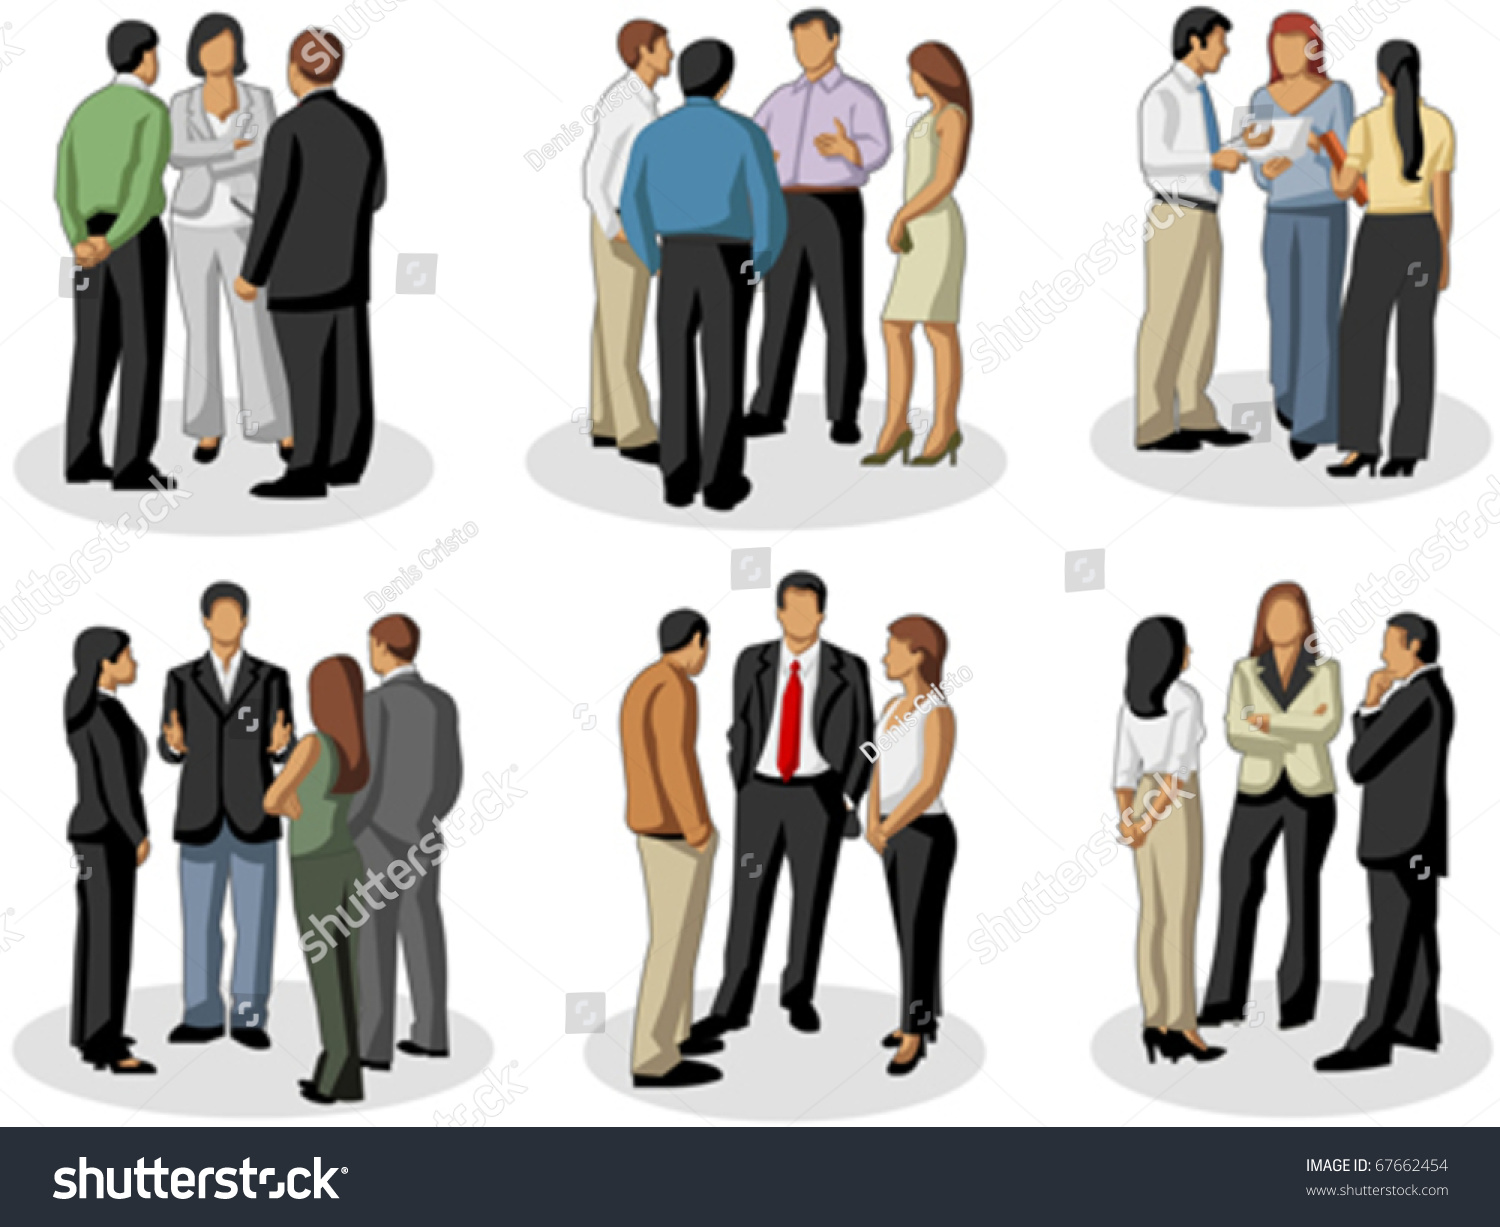 business casual clipart - photo #50